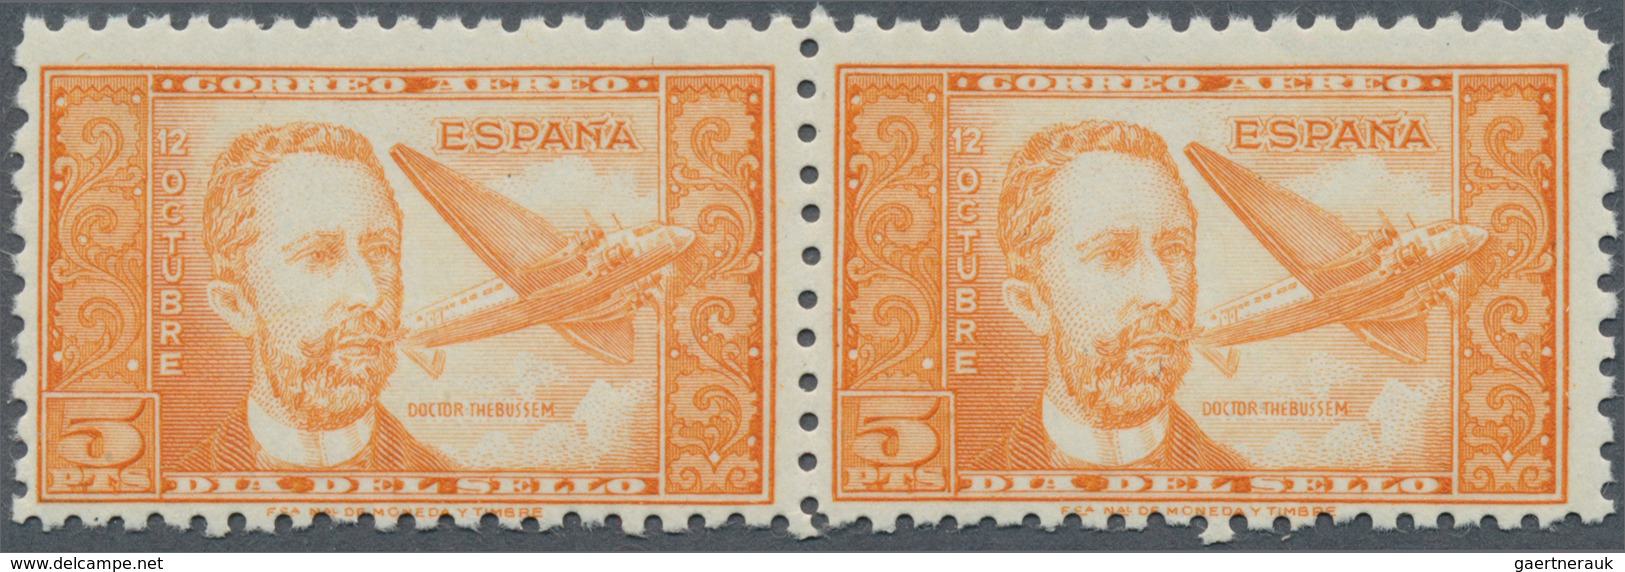 Spanien: 1944, Airmail Stamp 5pts. "Dr.Thebussem", Color Variety "orange", Horiz. Pair, Unmounted Mi - Used Stamps